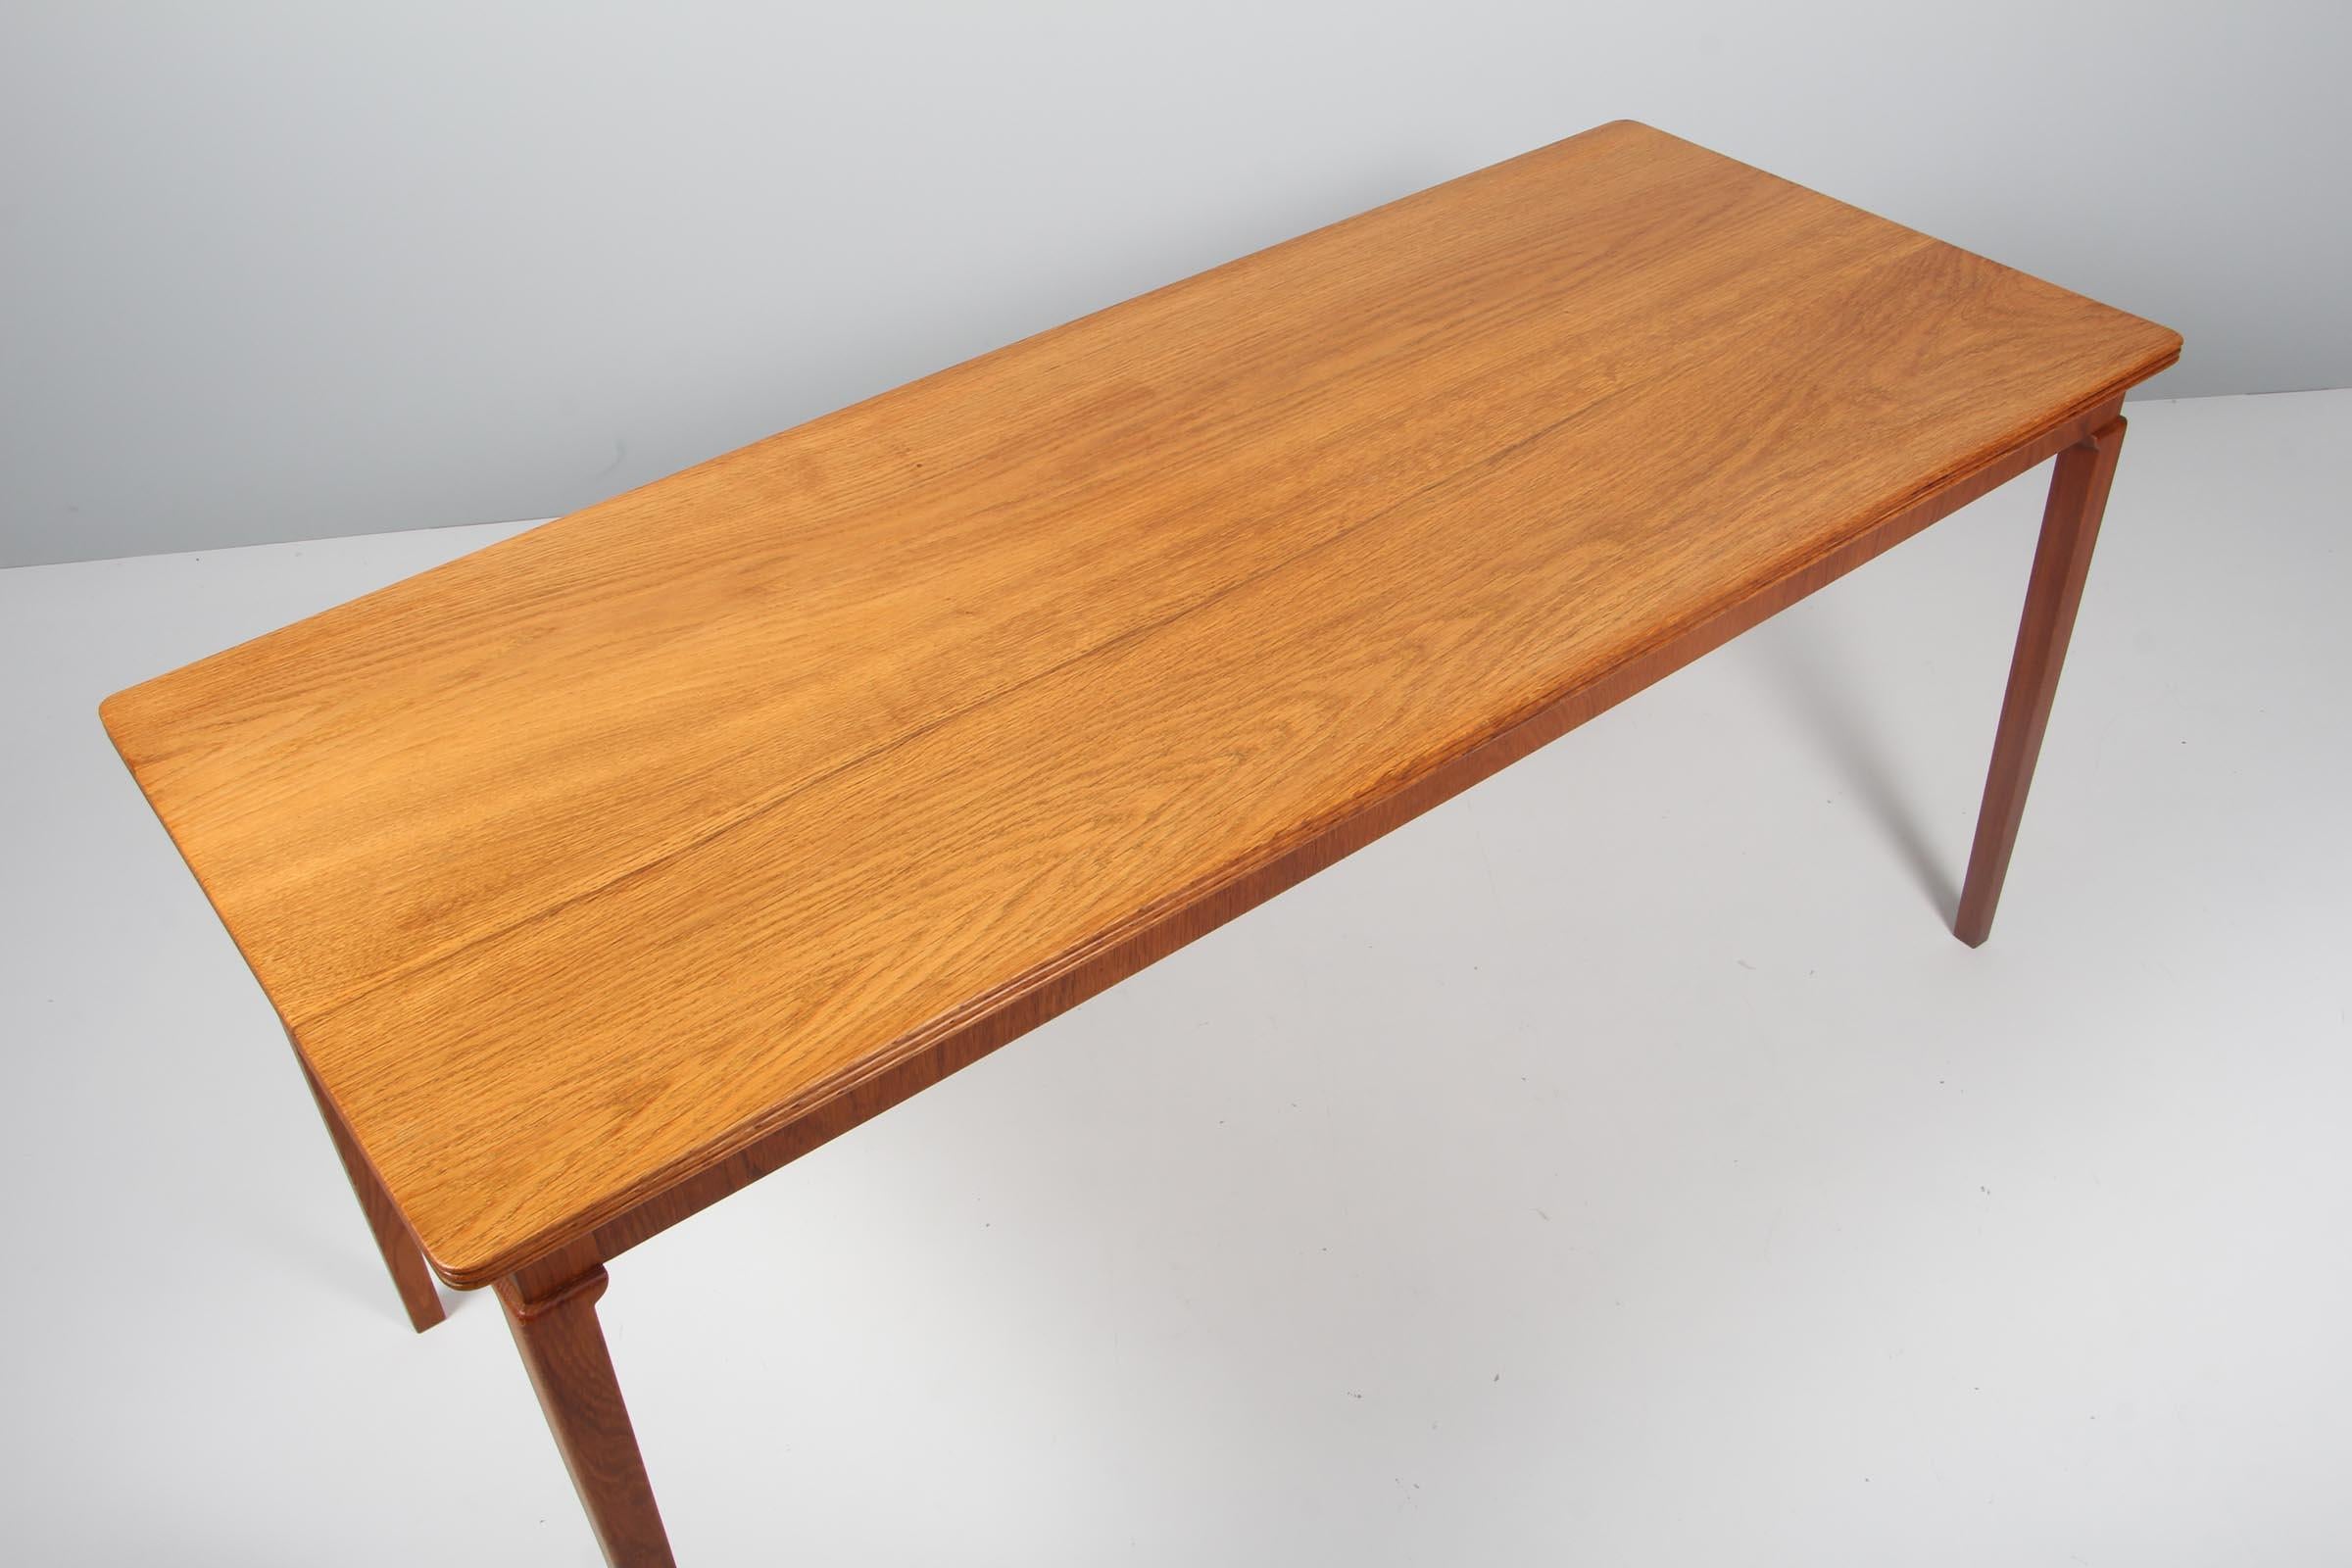 Frits Henningsen sofa table in solid oak with great details in the craftmanship.

Made by Frits Henningsen in the 1950s.